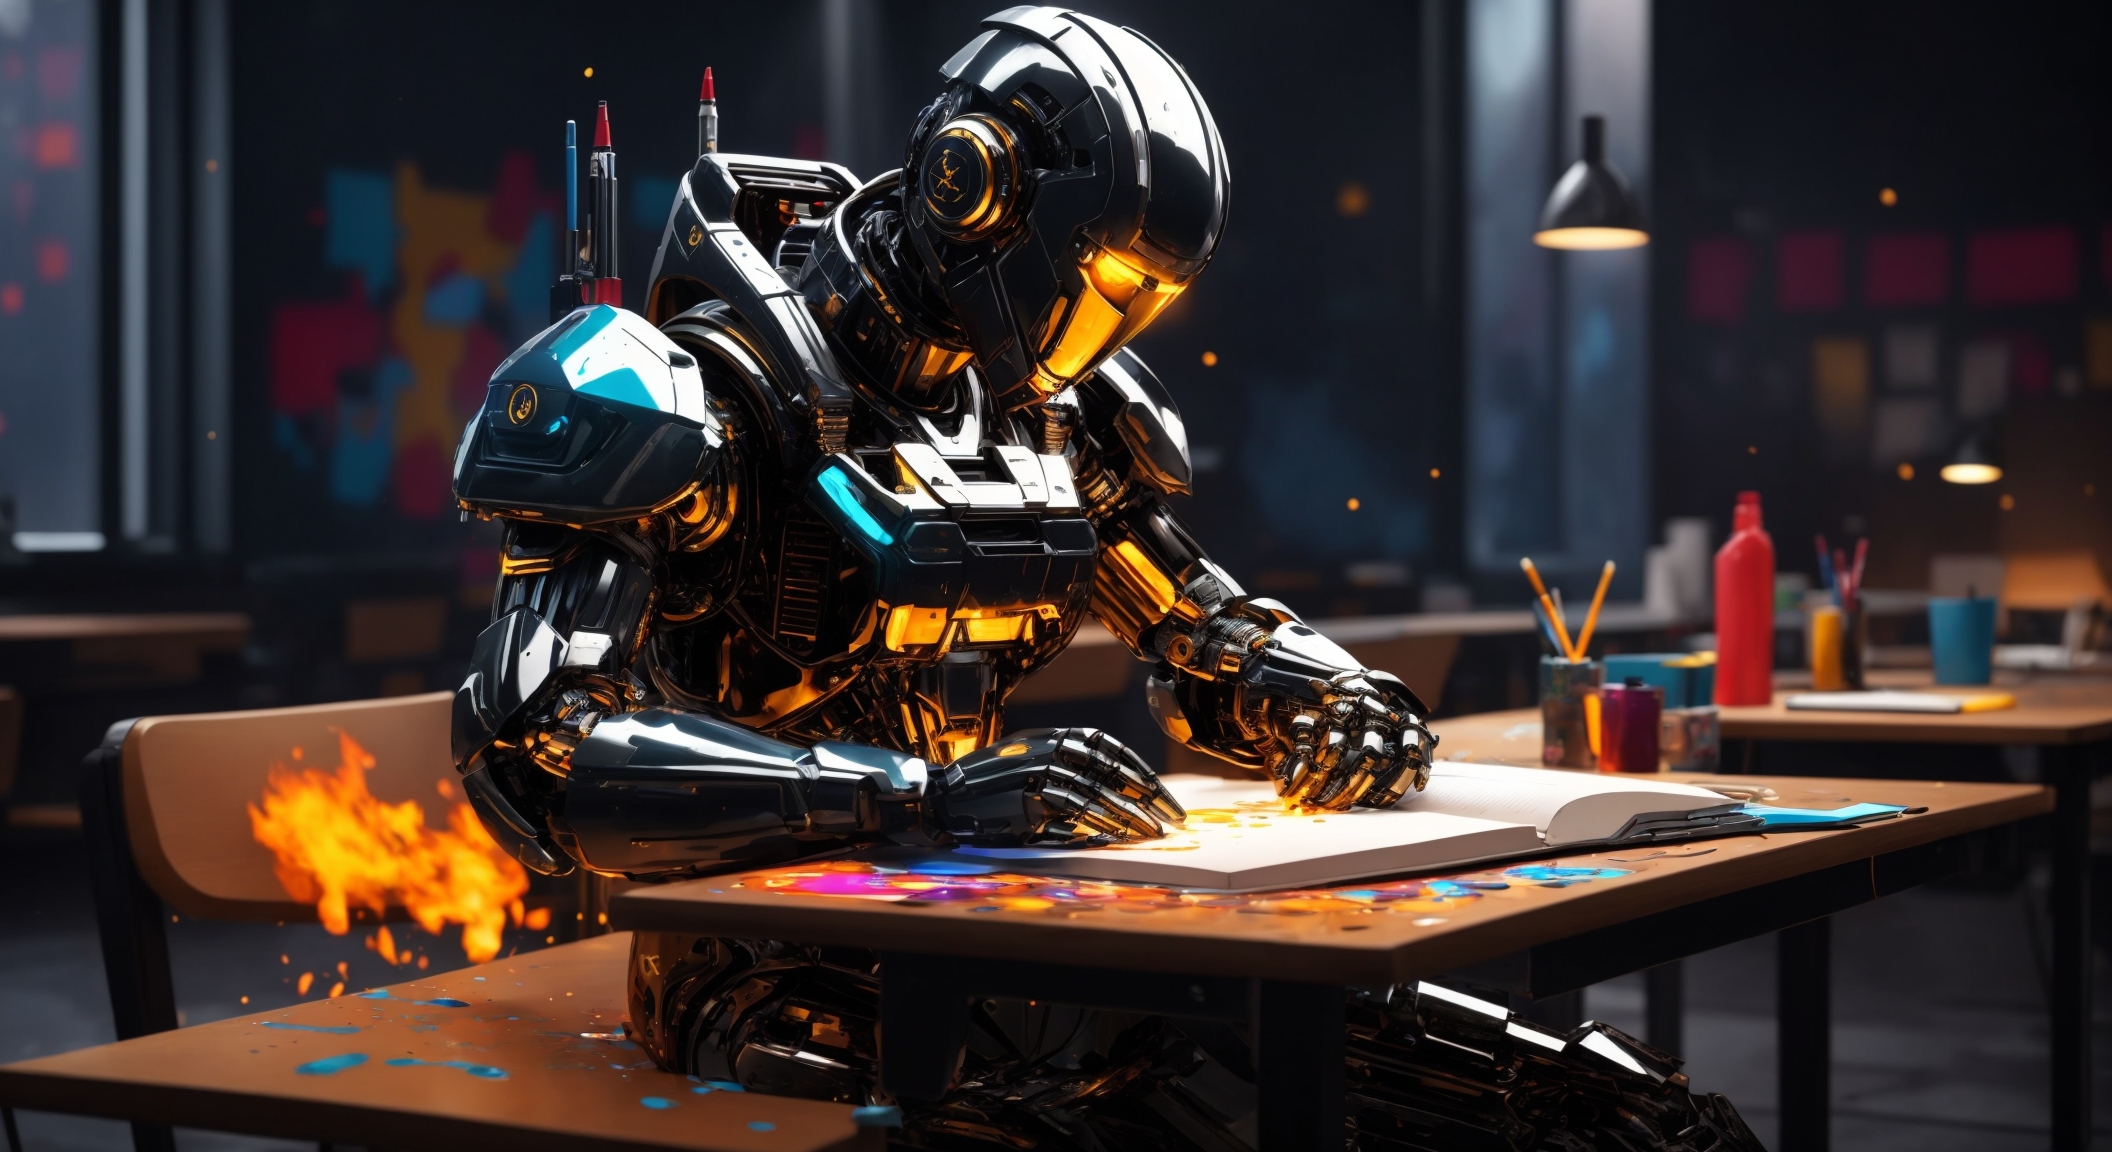 futuristic robot studying in a classroom, t-shirt design, line art, black background, ultra-detailed art, beautiful, water splash, color art, fire and ice, splatter, black ink, liquid melt, dreamy, glowing, Glamour, Glimmer,shadows,Oil On Canvas, Brush Strokes, Smooth, Ultra High Definition, 8k, Unreal Engine 5, Gs Studio, Ultra Sharp Focus, Intricate Artwork Masterpiece, Golden Ratio, High Detail, Vibrant, Production Cinematic Character Render, Ultra High Quality Model, ultra high definition, 30 megapixels, sharp focus, front camera, monovisions, perfect contrast, high sharpness, art quality by GIlSam-paio, octane rendering, 8k, ultra high definition, Studio Gs Cinema HD